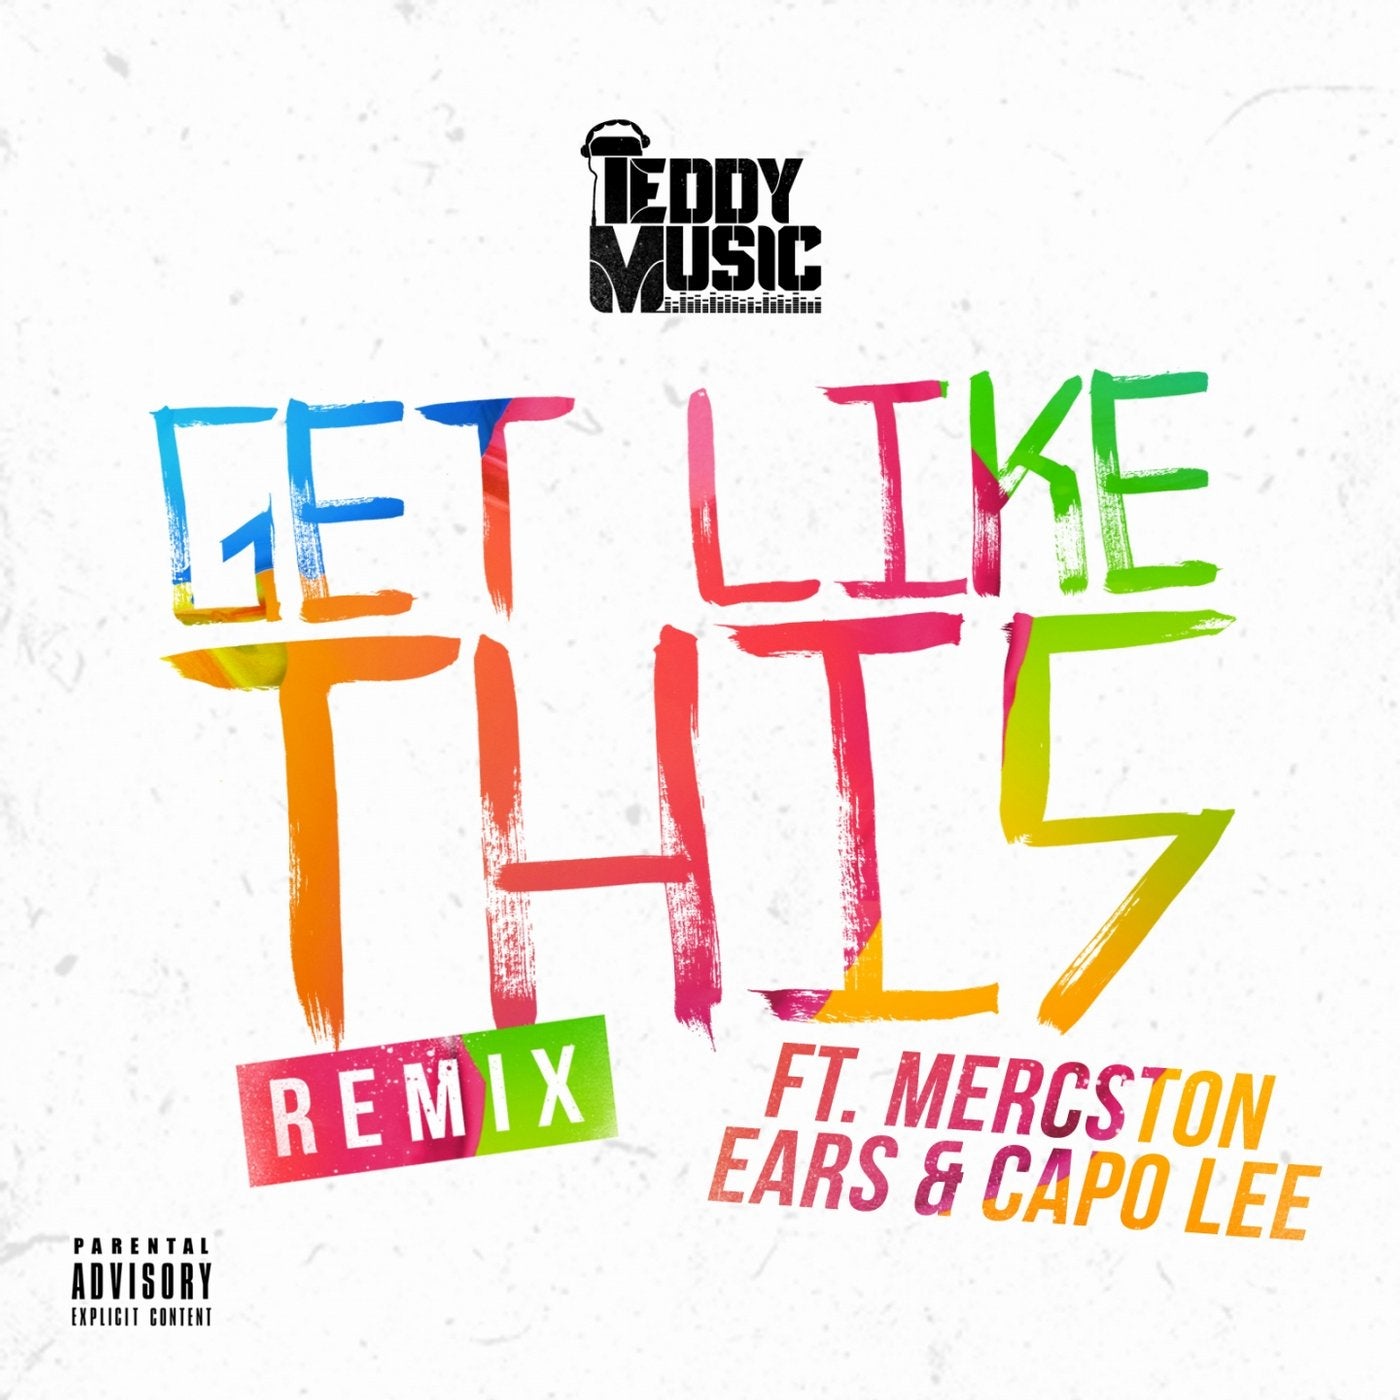 Get Like This (Remix)